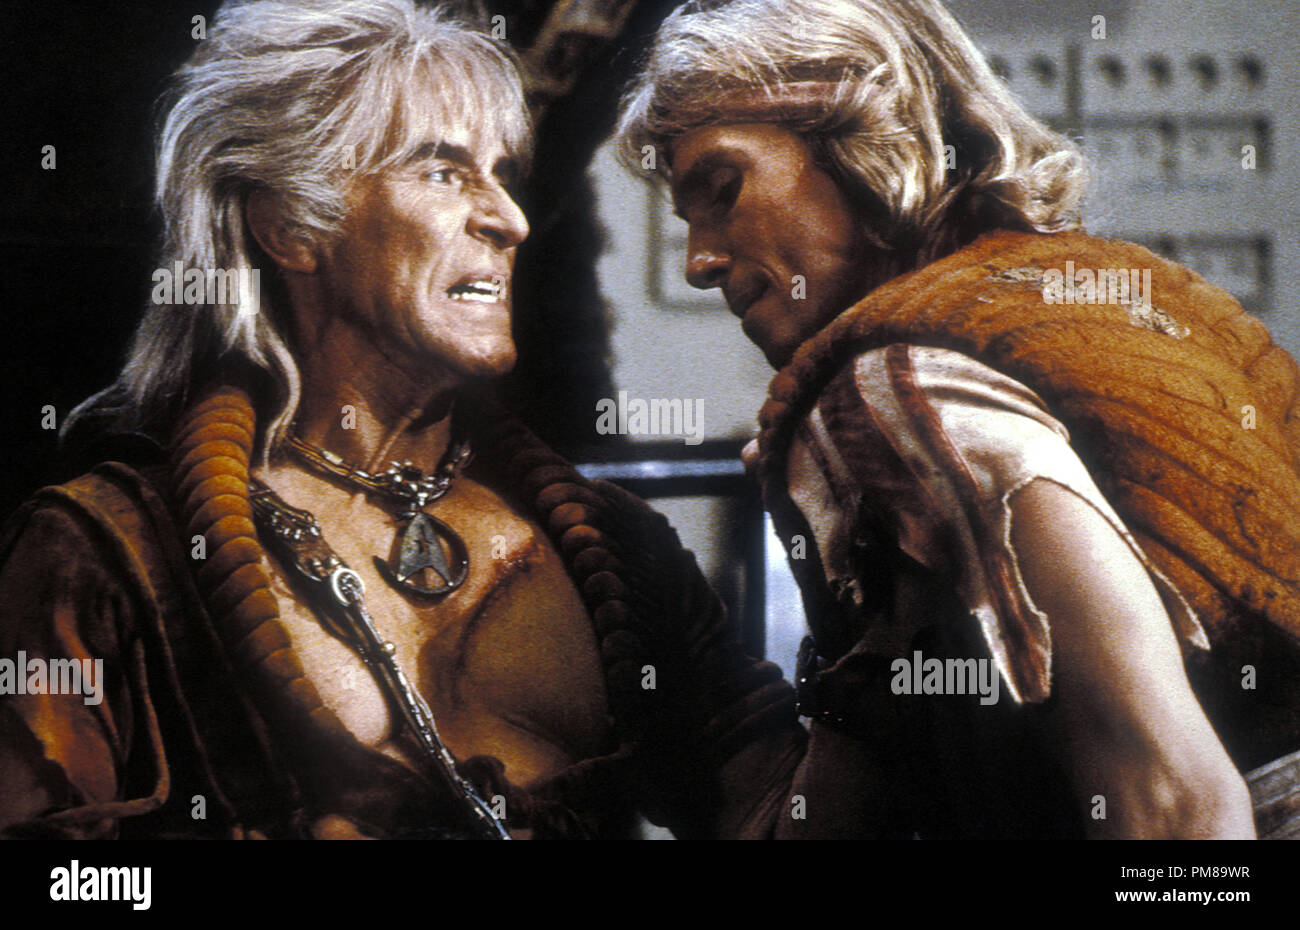 Studio Publicity Still from 'Star Trek II: The Wrath of Khan' Ricardo Montalban © 1982 Paramount All Rights Reserved   File Reference # 31710103THA  For Editorial Use Only Stock Photo